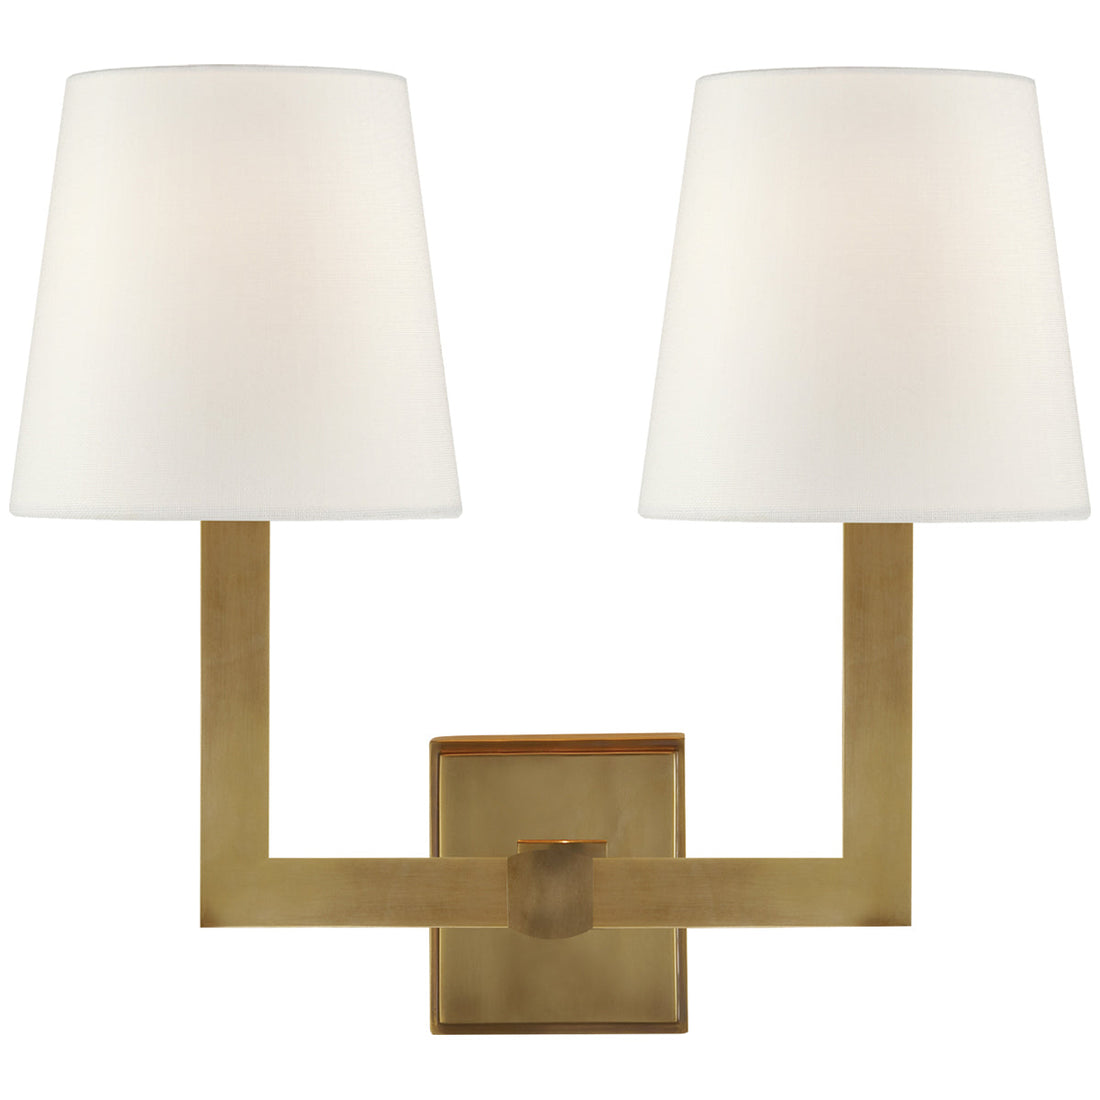 Visual Comfort Square Tube Double Sconce with Linen Shades